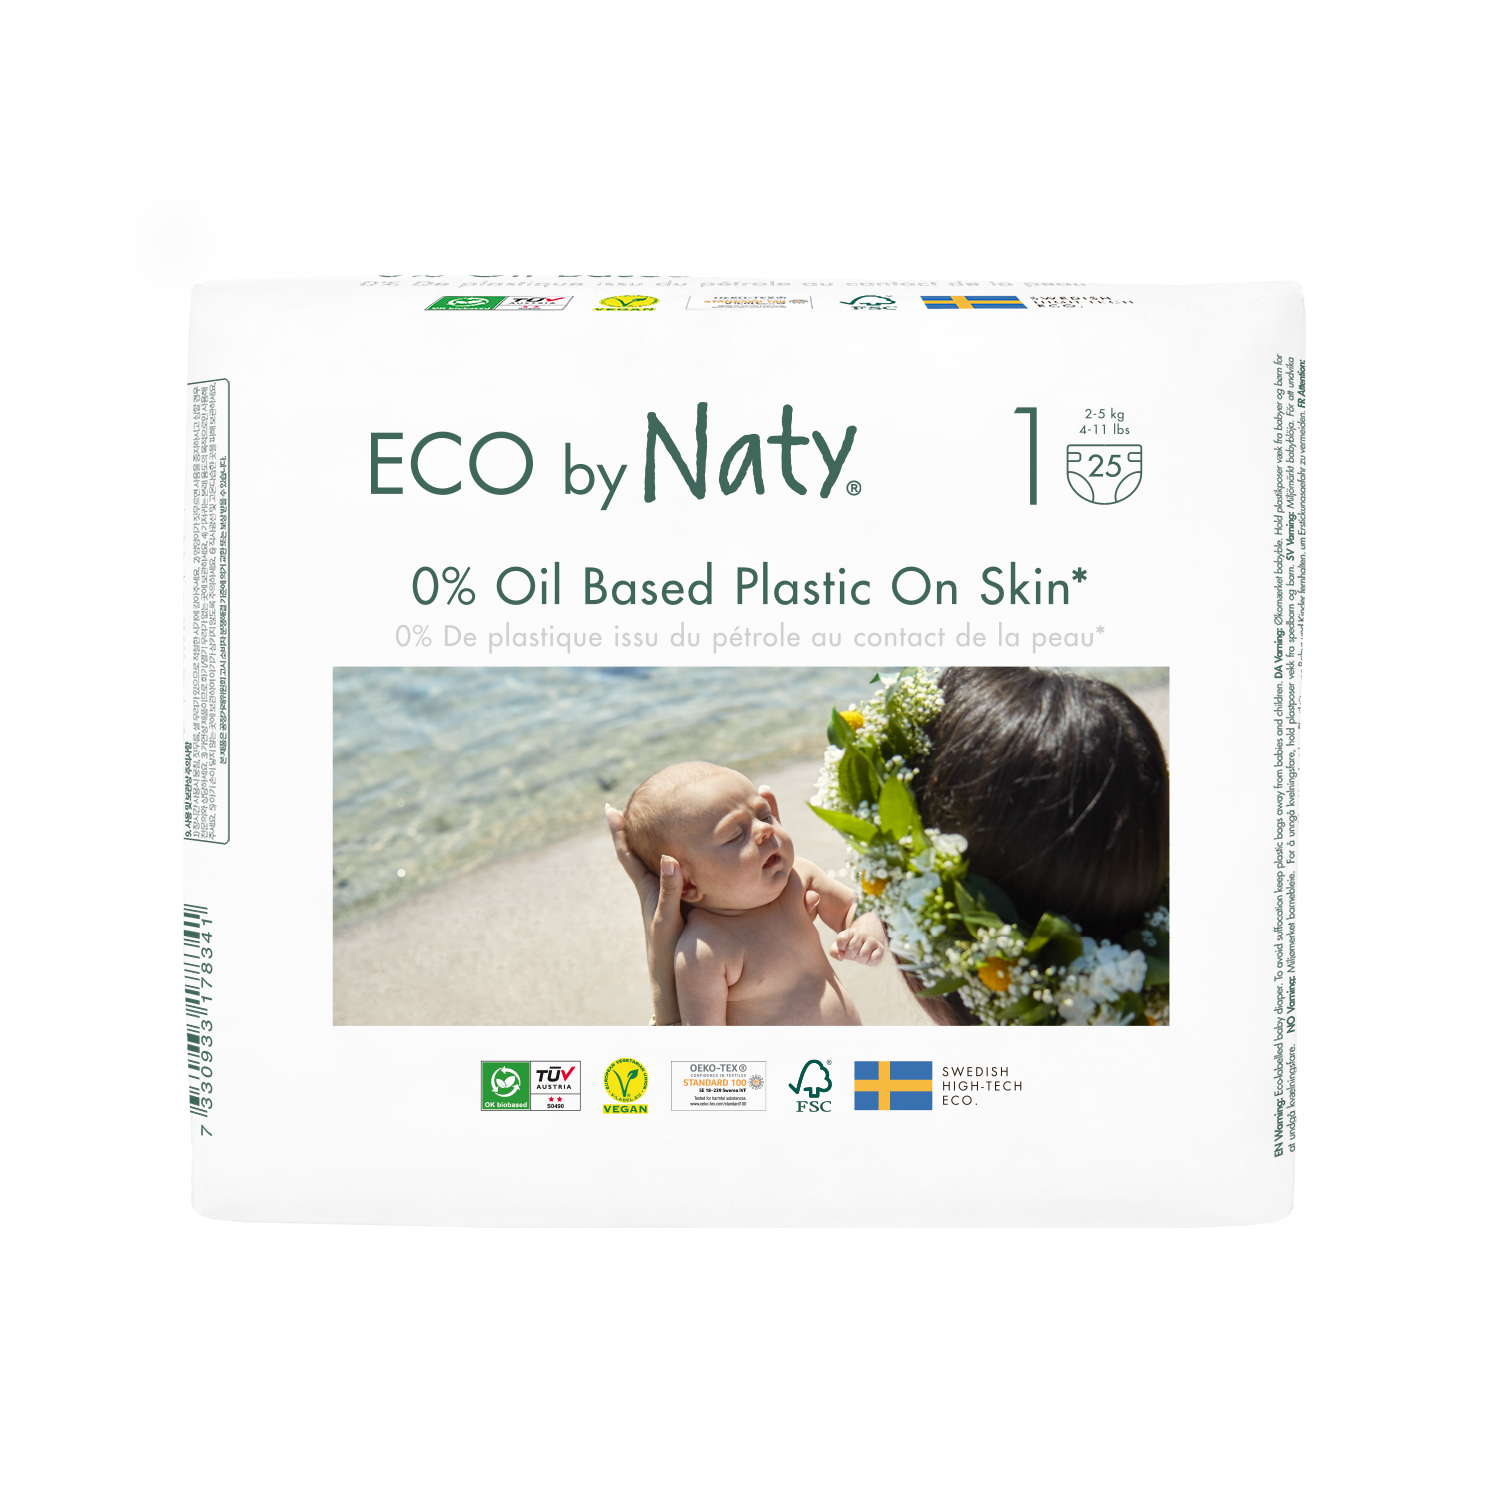 Eco Couches Pants Naty – Taille 4 Maxi 8-15 kg, 22 pcs